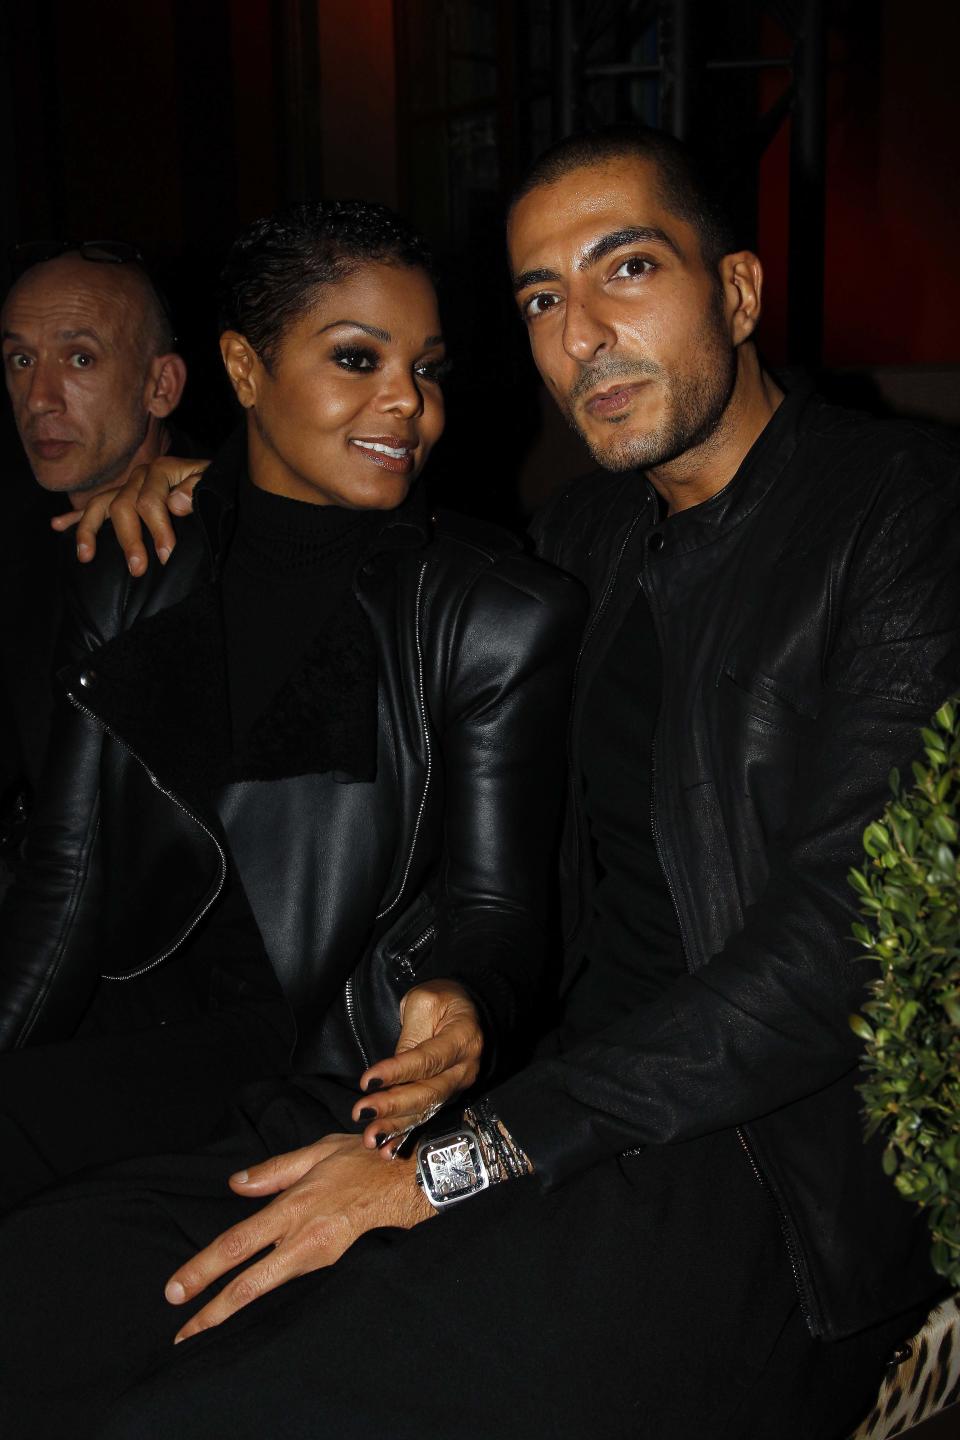 Janet Jackson and Wissam Al Mana attend the Roberto Cavalli 40th anniversary party in Paris on Sept. 29, 2010. (Photo: Michel Dufour/WireImage)